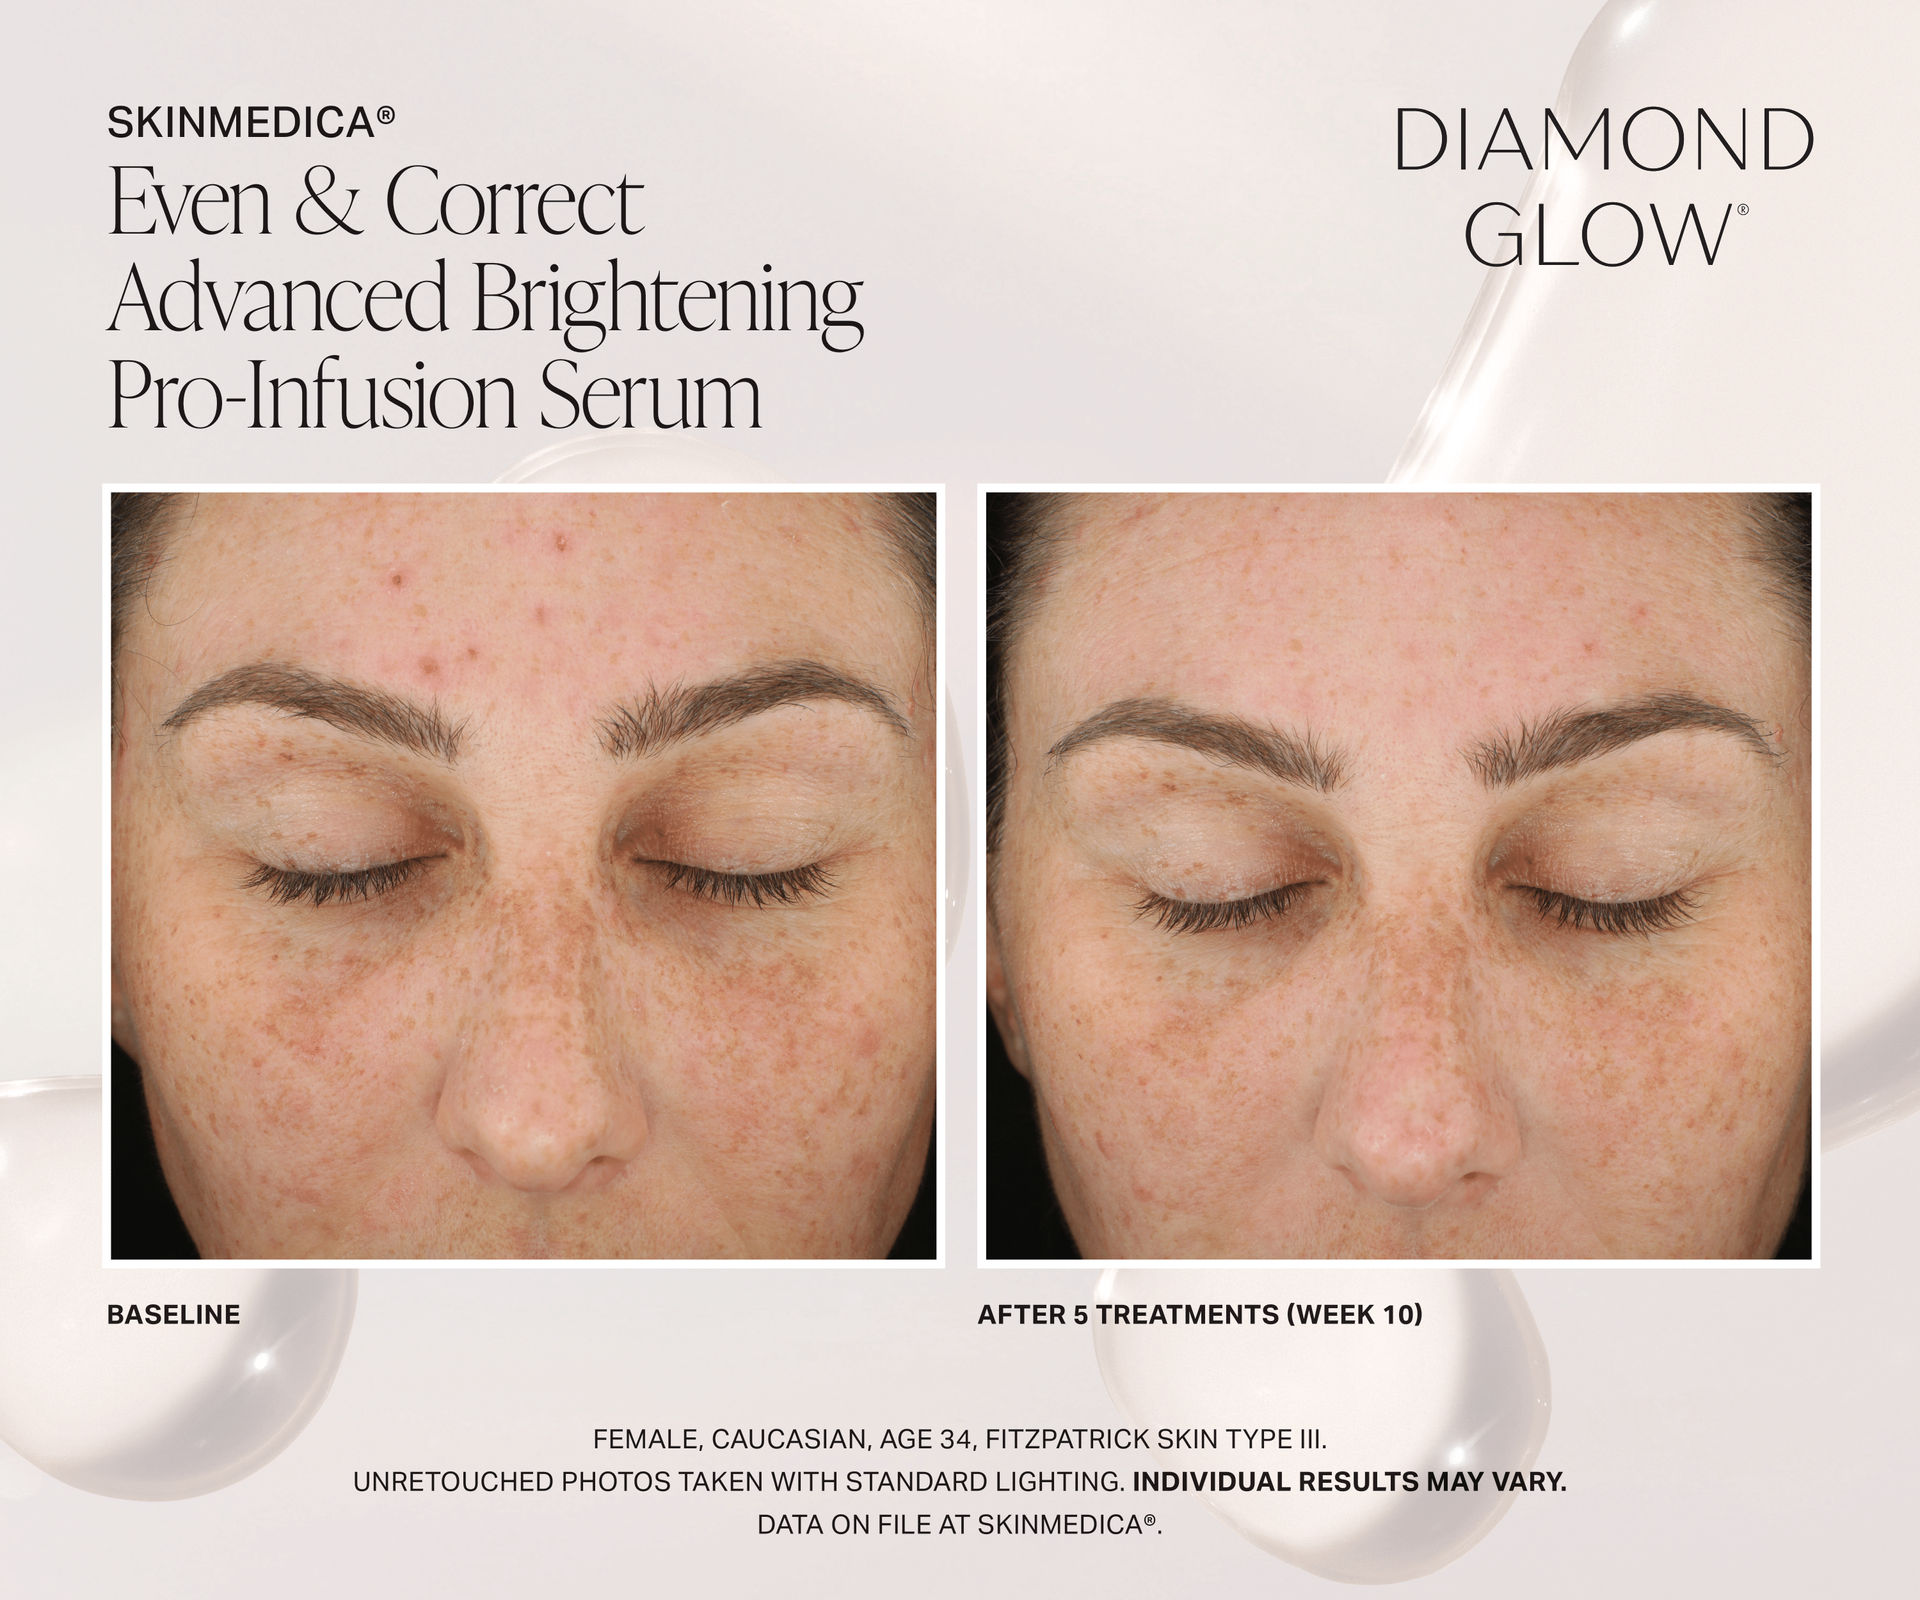 A before and after photo of a woman's face using diamondglow